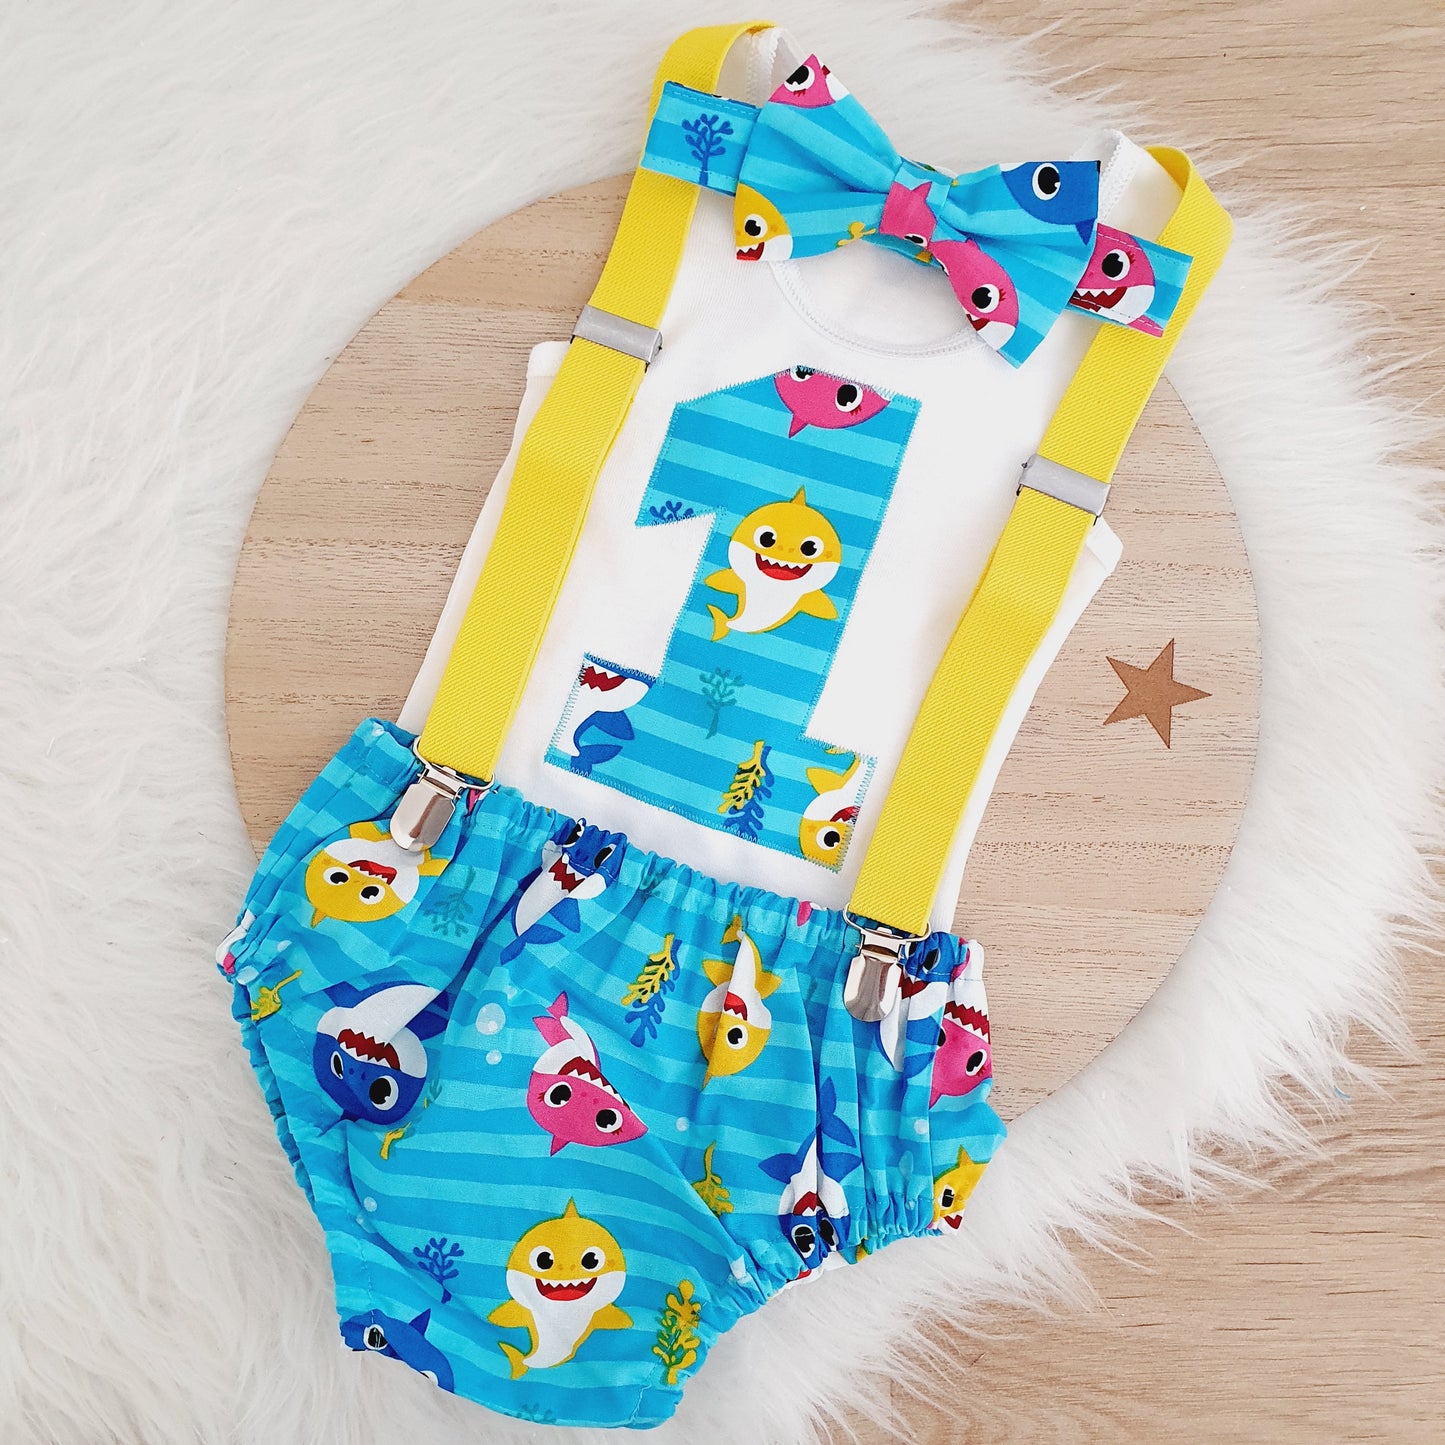 BABY SHARK Boys Cake Smash Outfit, First Birthday Outfit, Size 0, 4 Piece Set